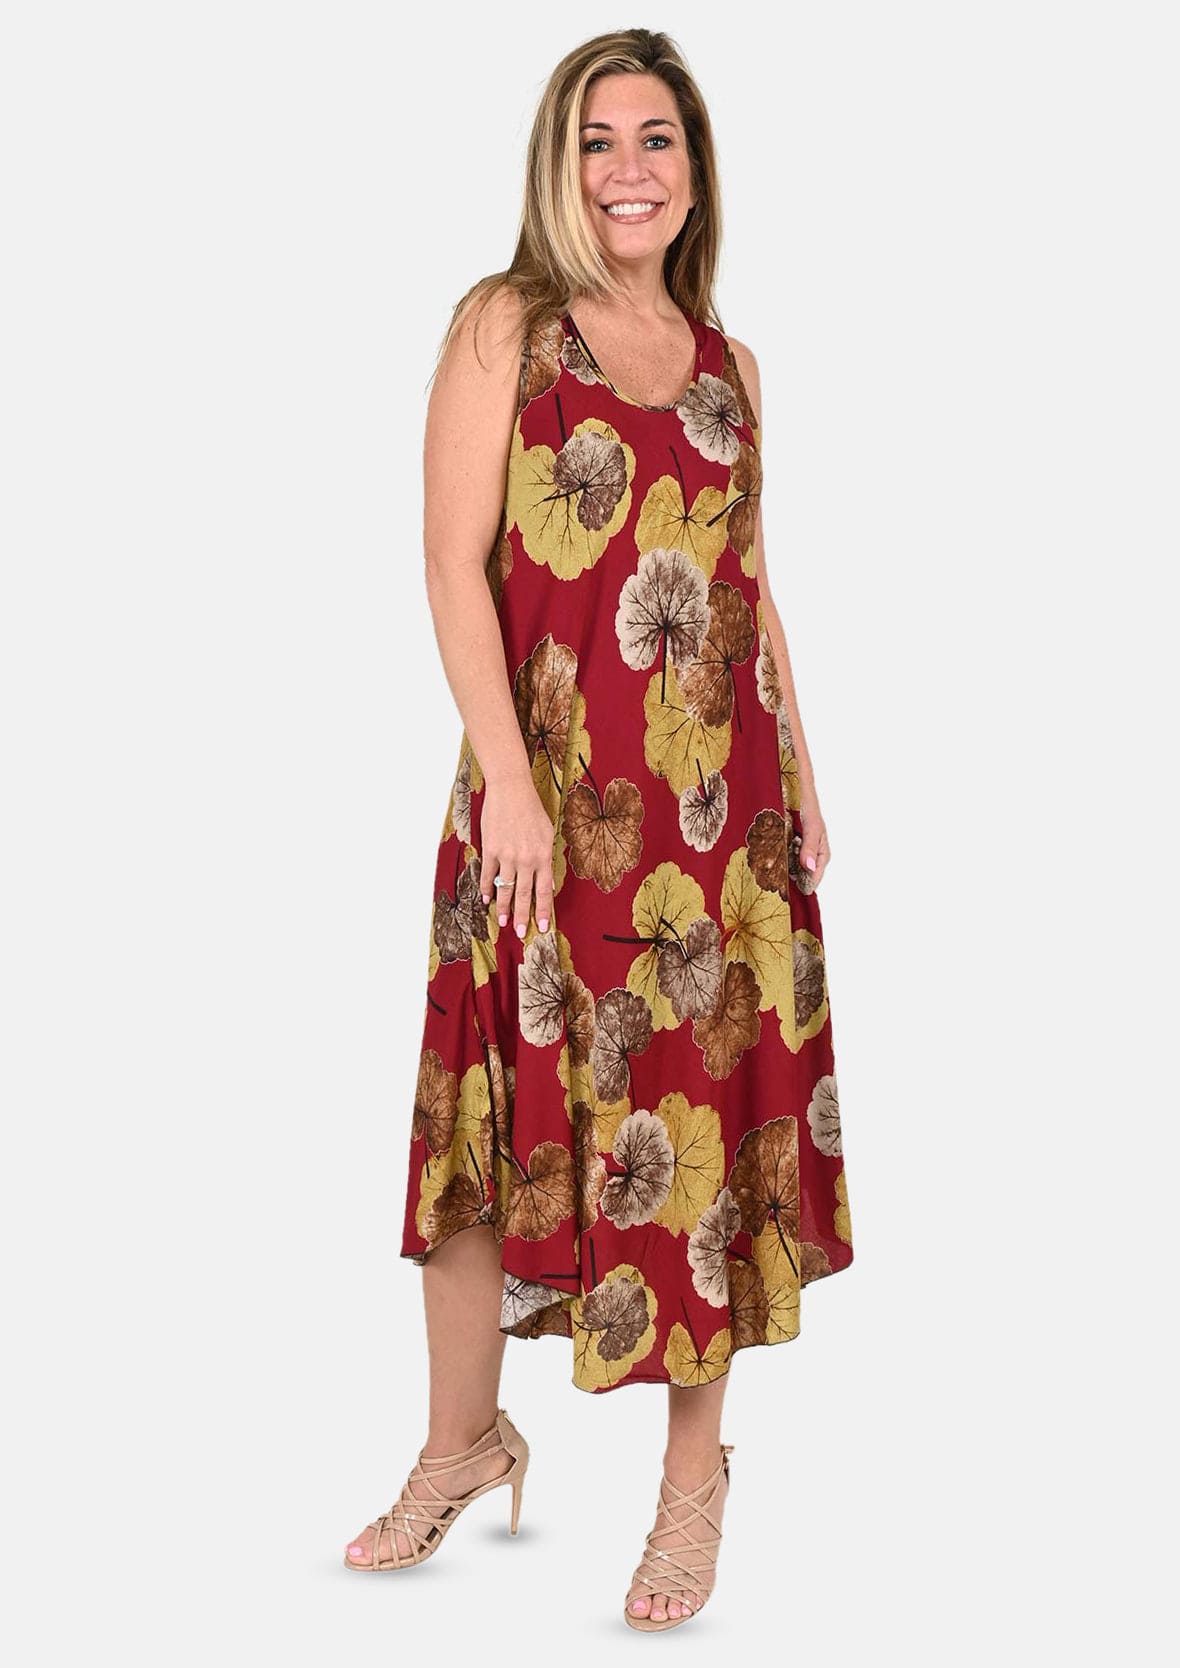 lady wearing leaf print red umbrella dress #color_Ruby Red and Yellow